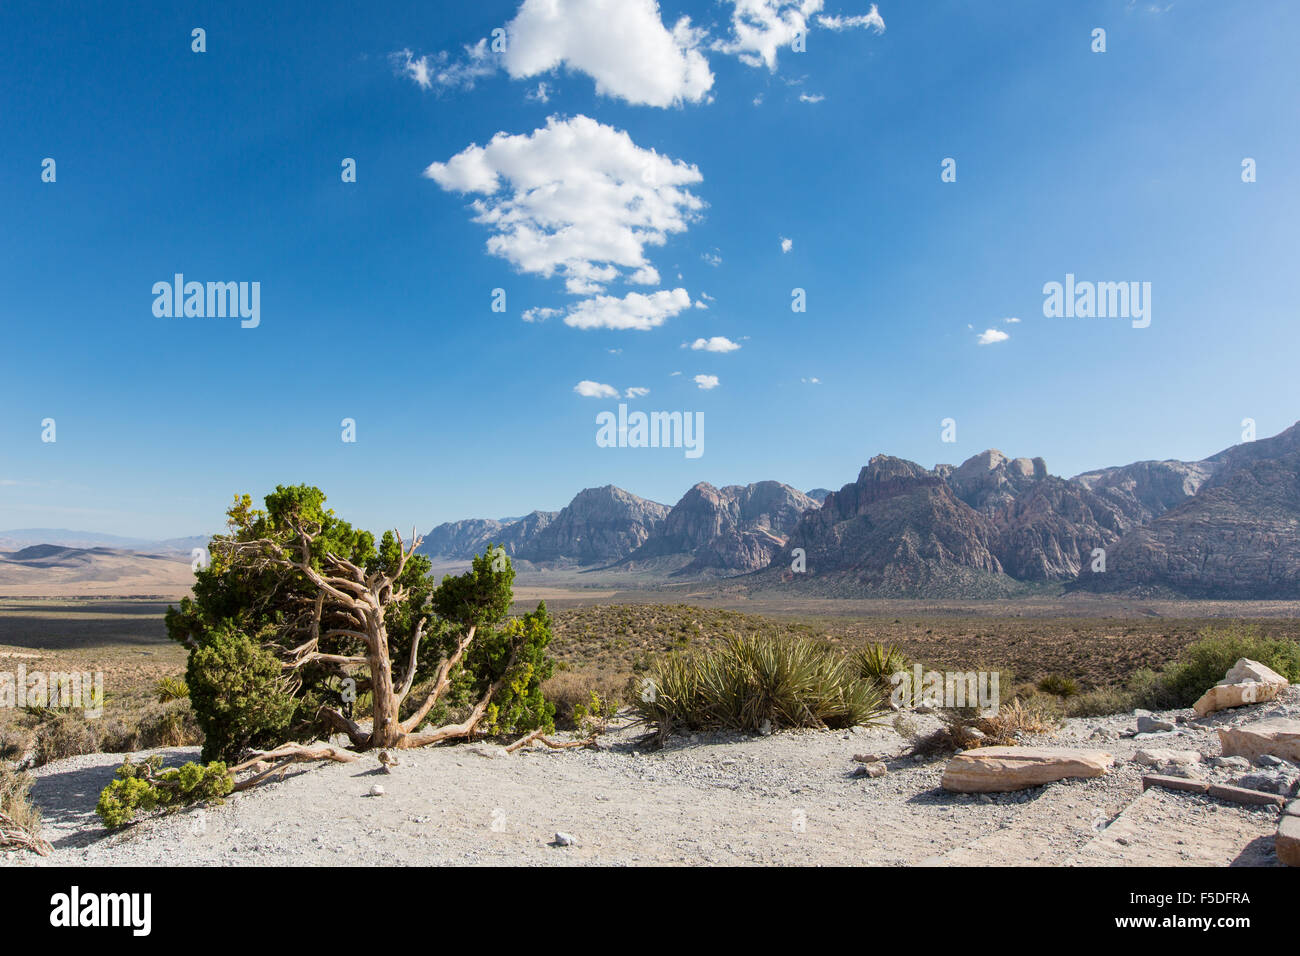 Landscape in Red Rock Canyon State Park near Las Vegas, Nevada, USA Stock Photo